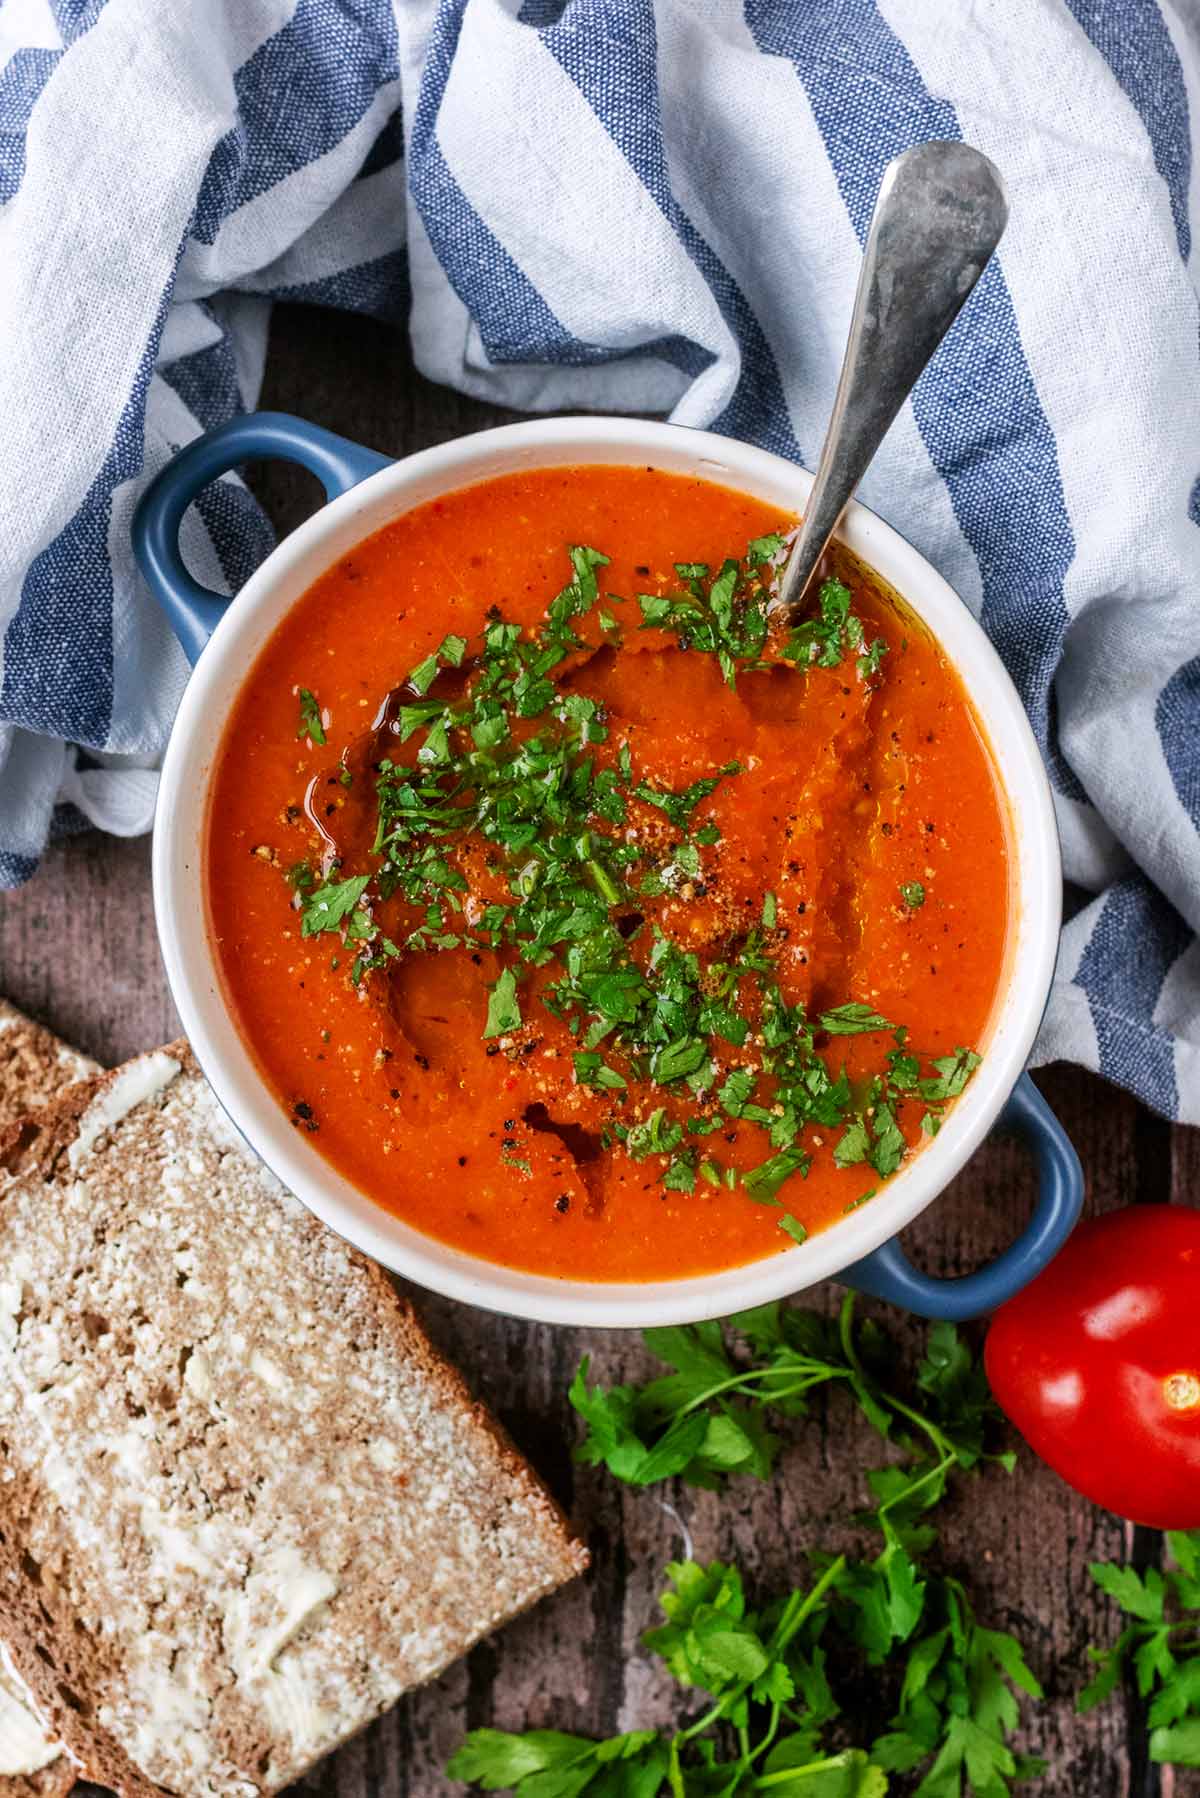 A bowl of red coloured soup next to some buttered bread, herbs and a tomato.